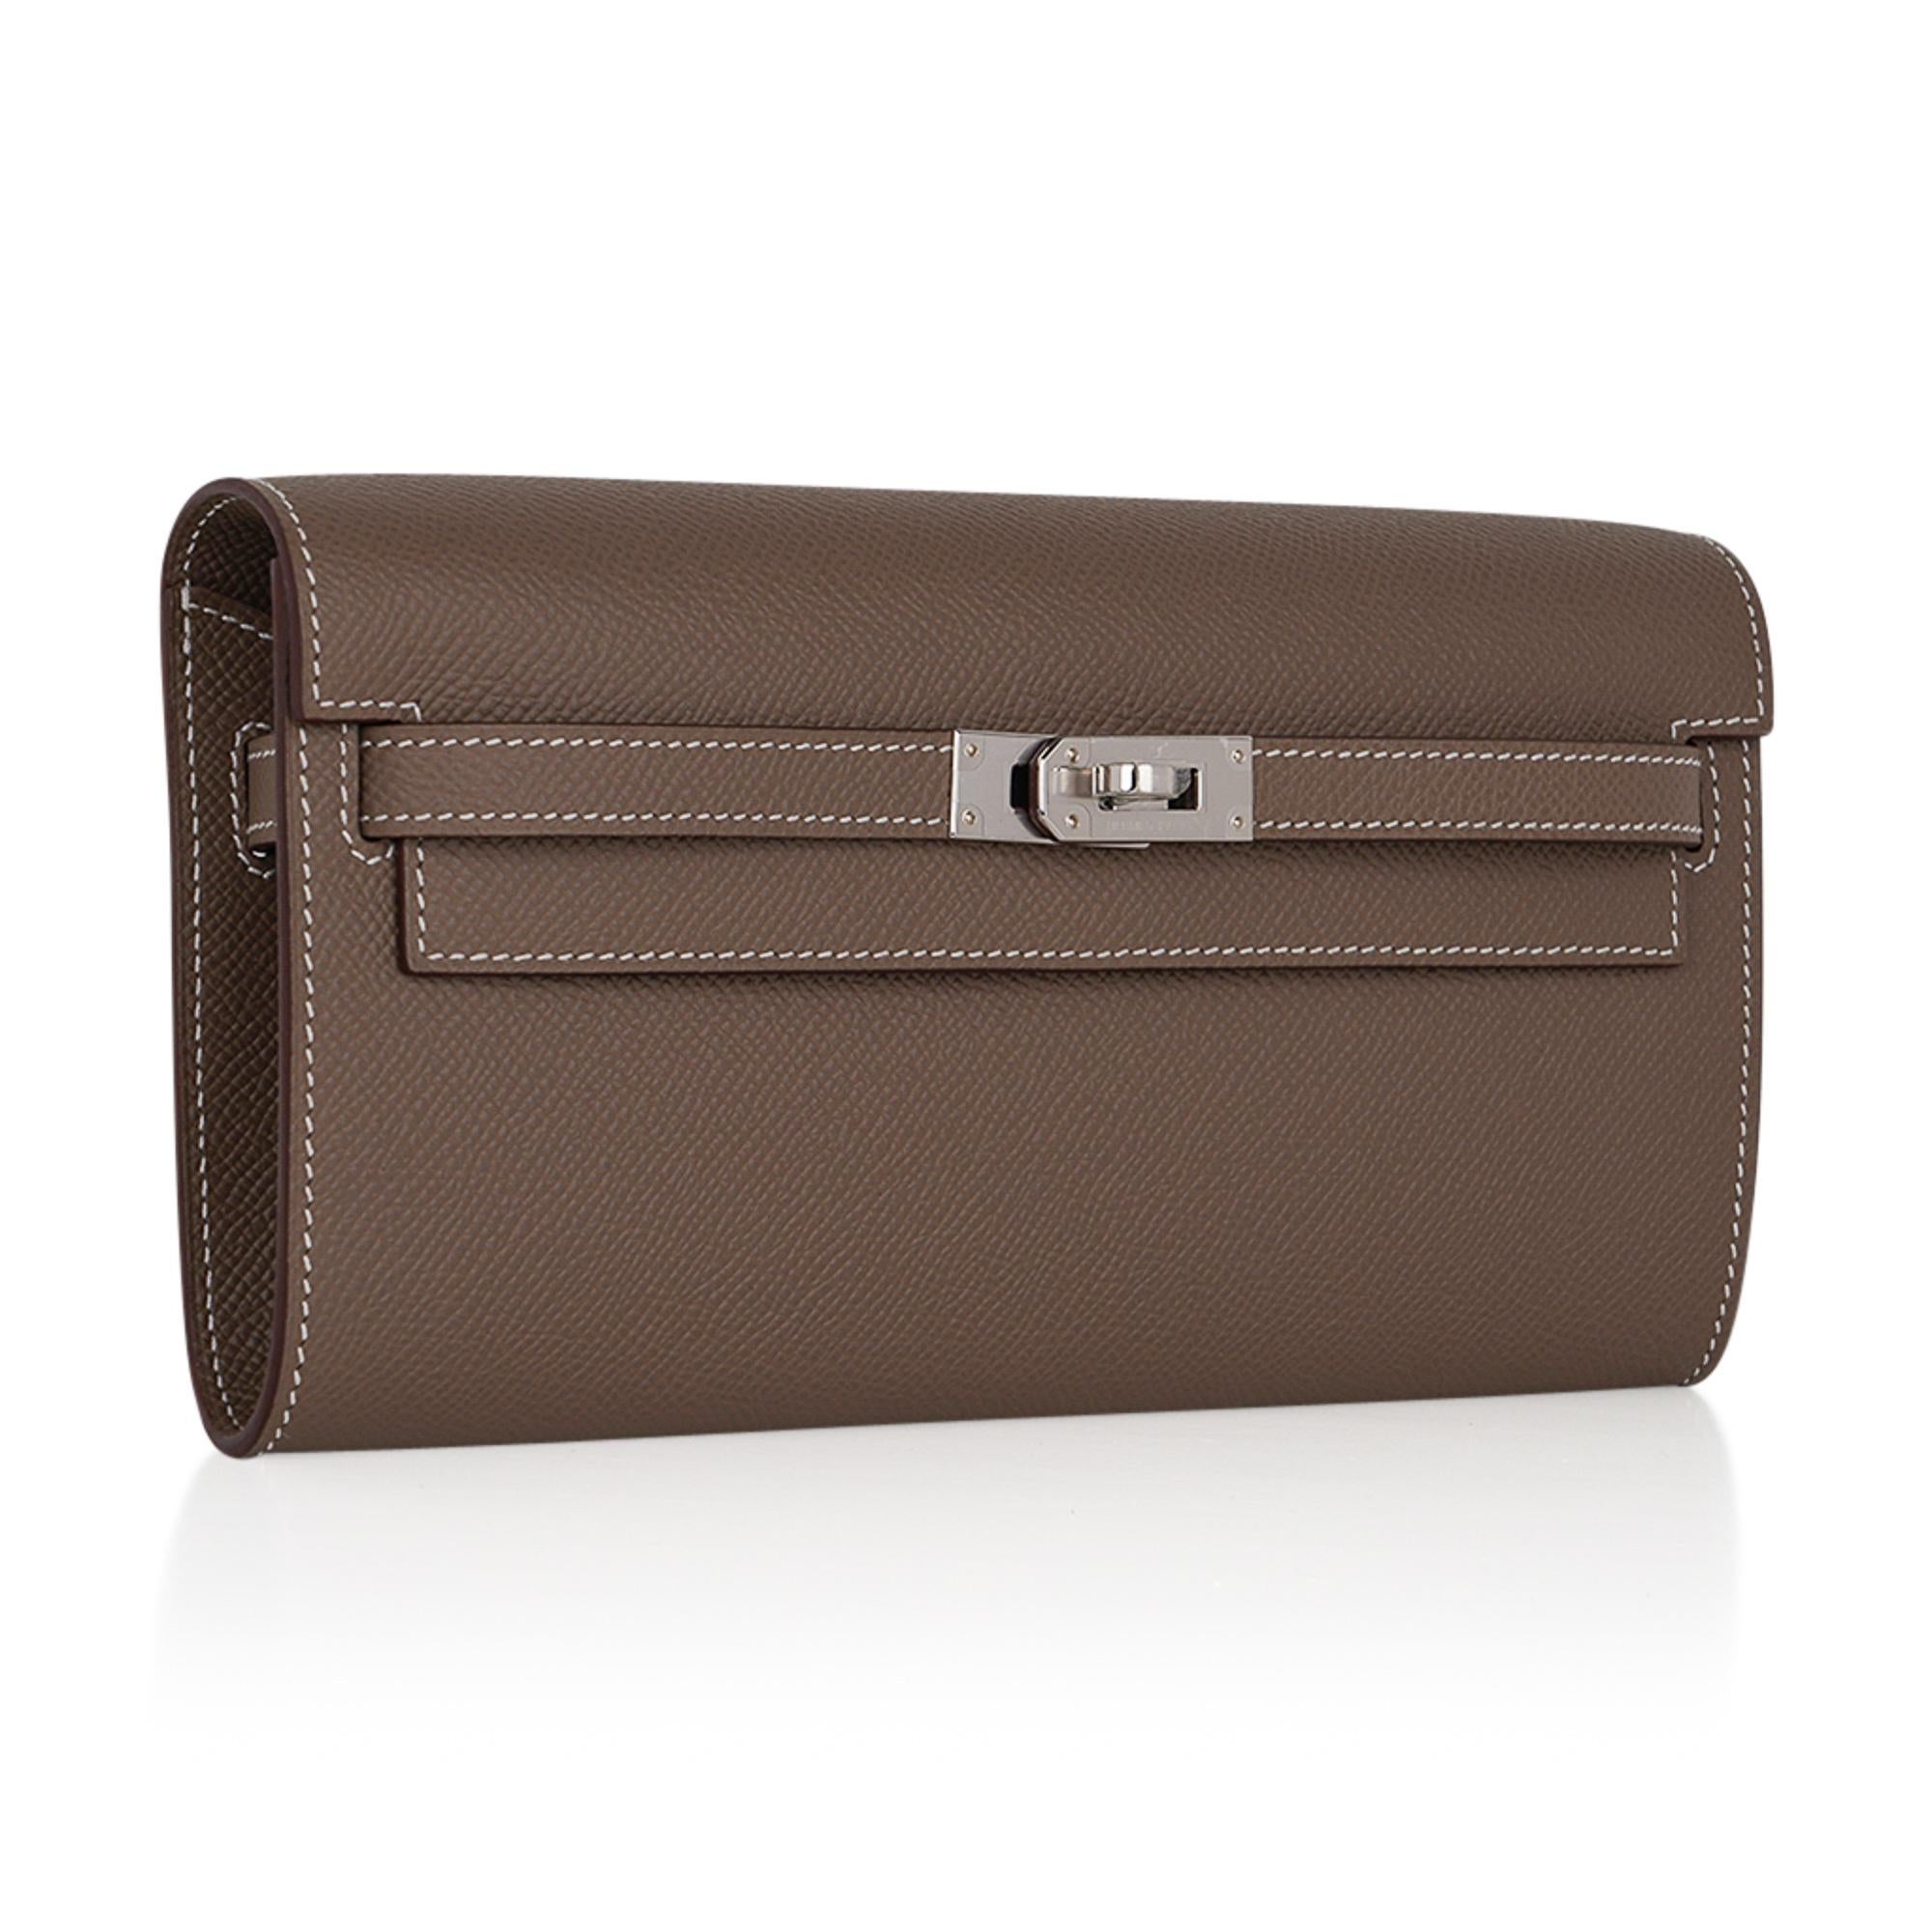 Mightychic offers an Hermes Kelly Classique To Go wallet featured in Etoupe with signature bone topstitch.
Epsom leather.
Fresh with Palladium hardware.
Removable shoulder strap changes from a crossbody, to a wallet or clutch.
Interior has four (4)